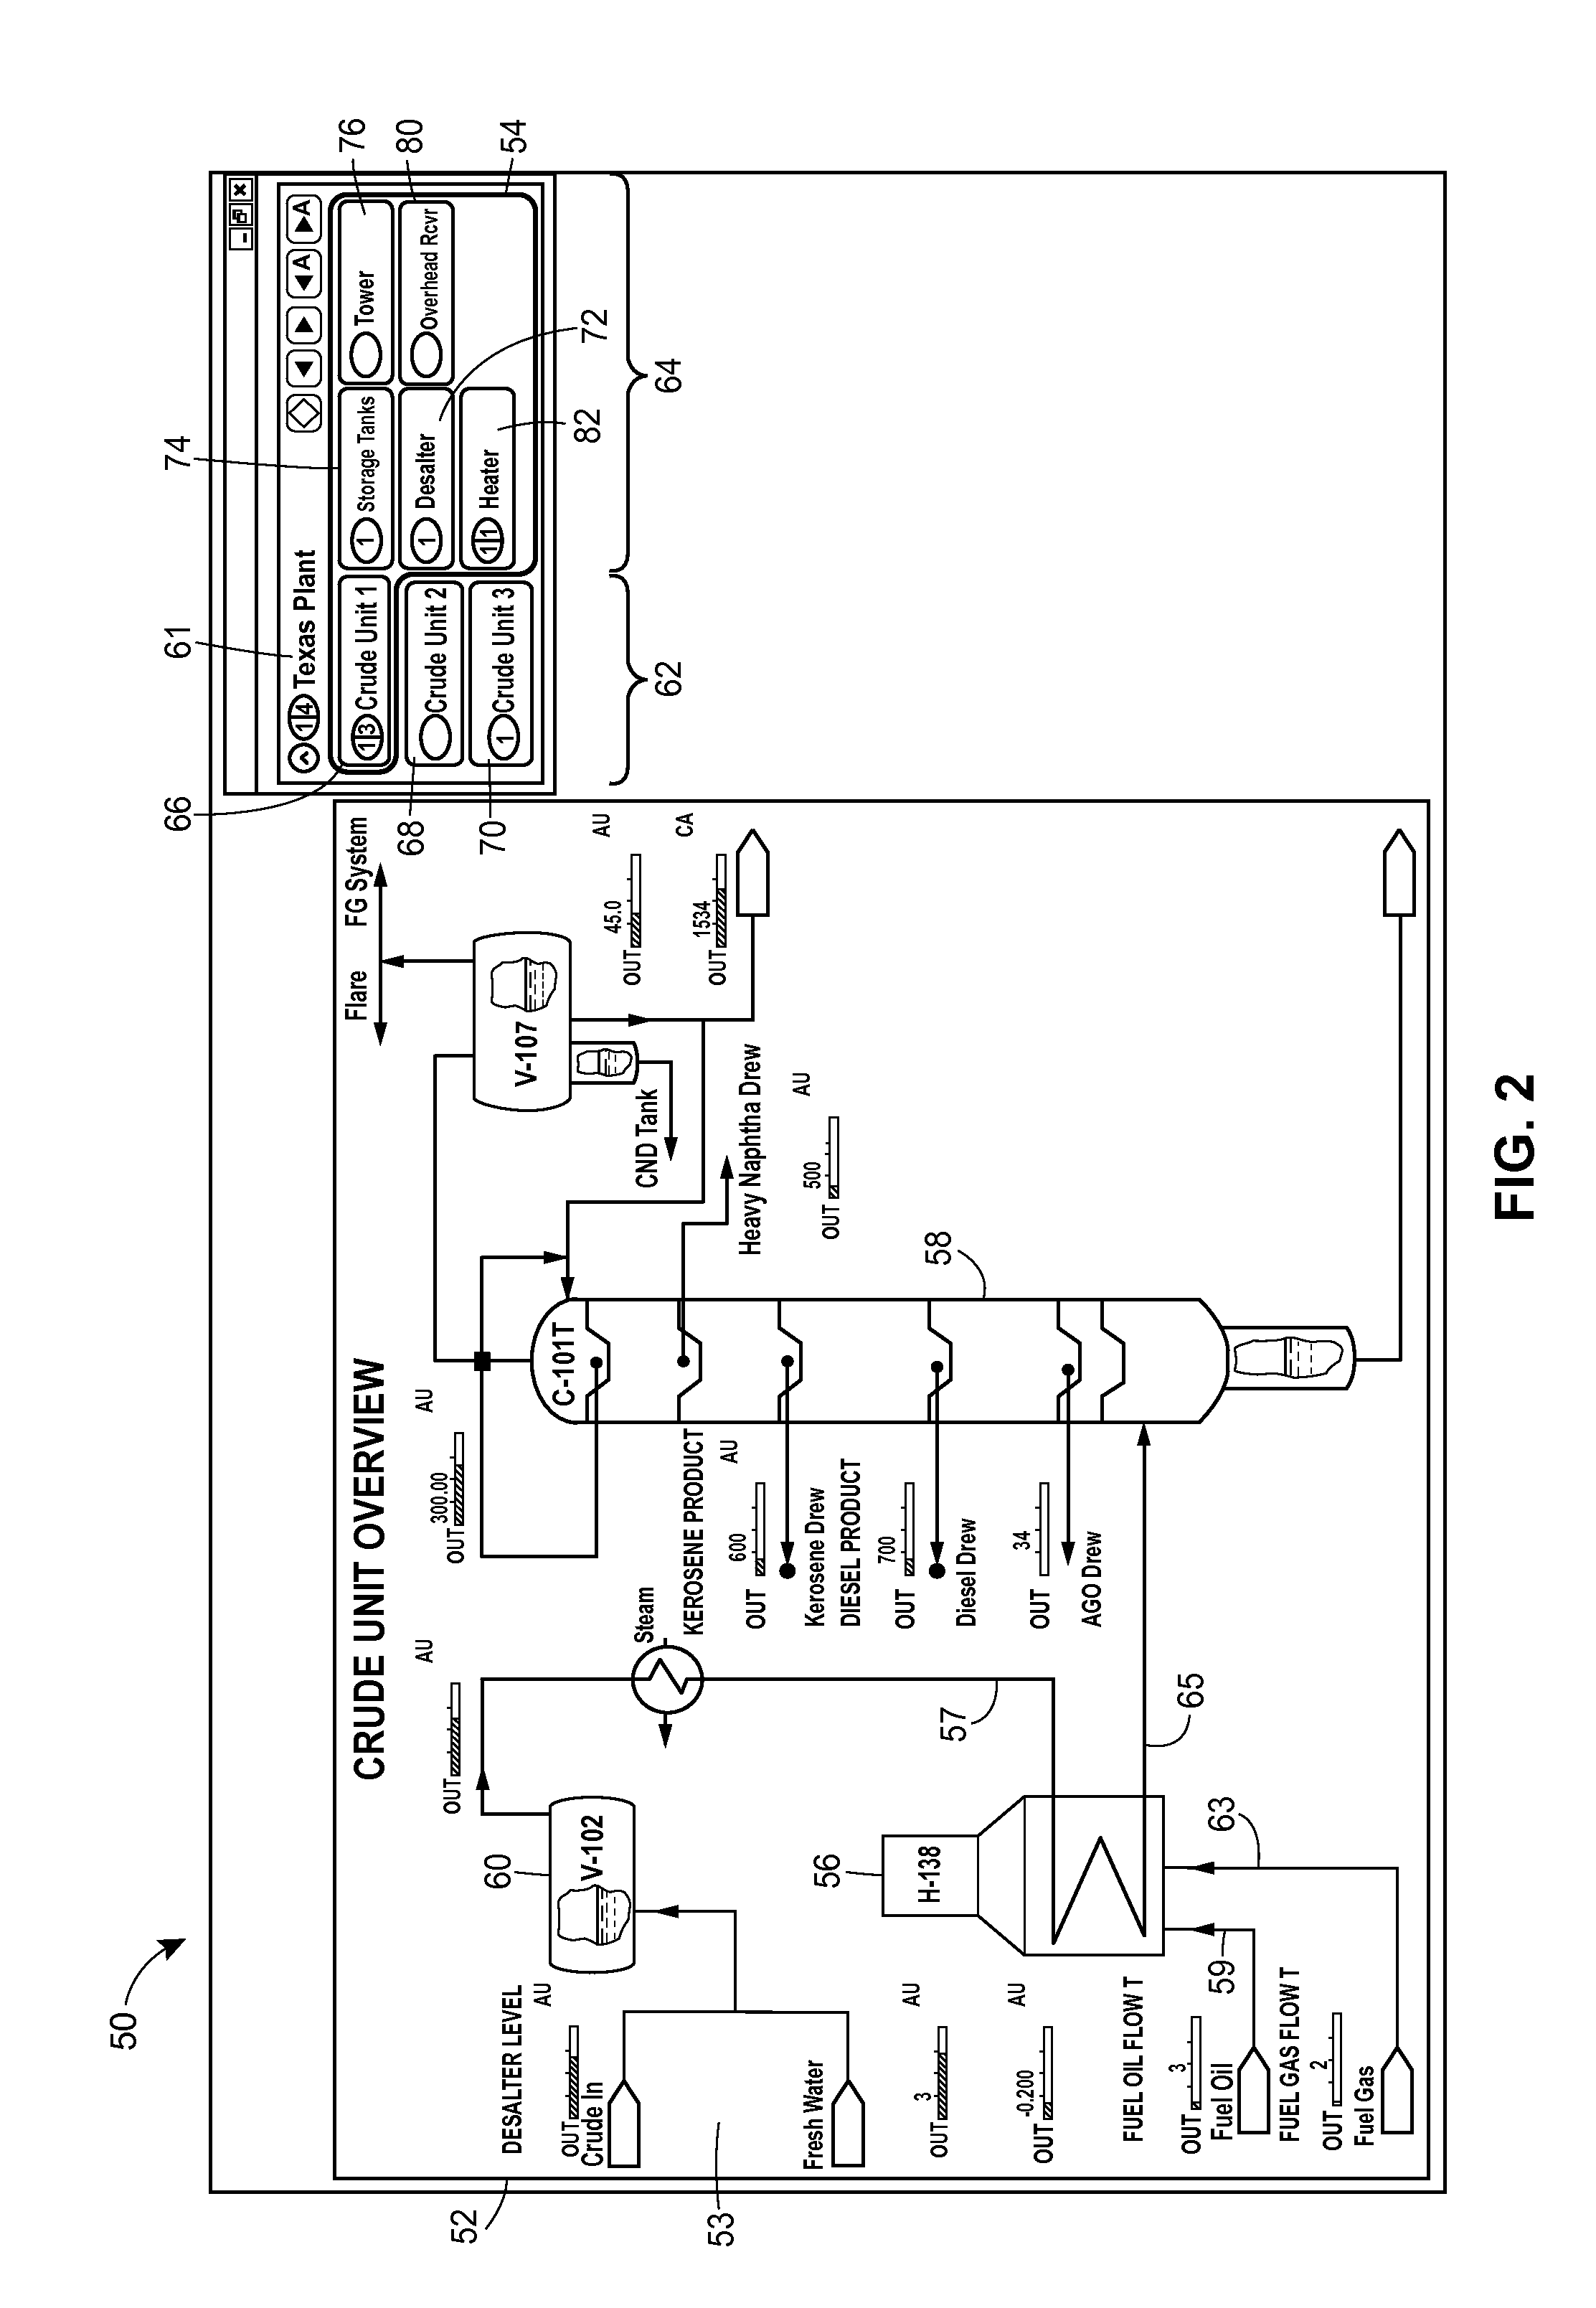 Graphical Process Variable Trend Monitoring, Predictive Analytics and Fault Detection in a Process Control System